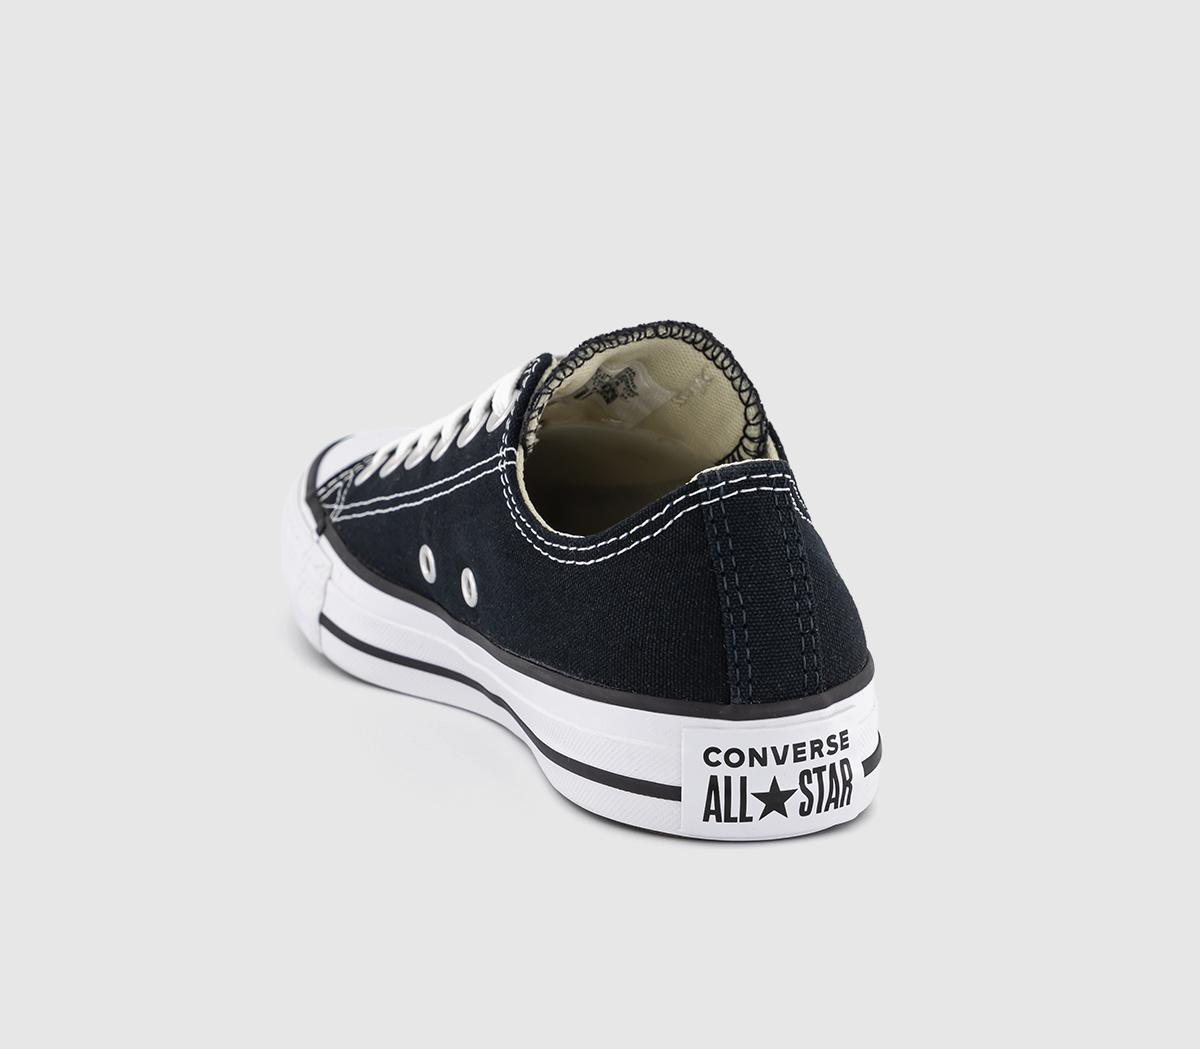 Converse All Star Low Black Canvas - Unisex Sports